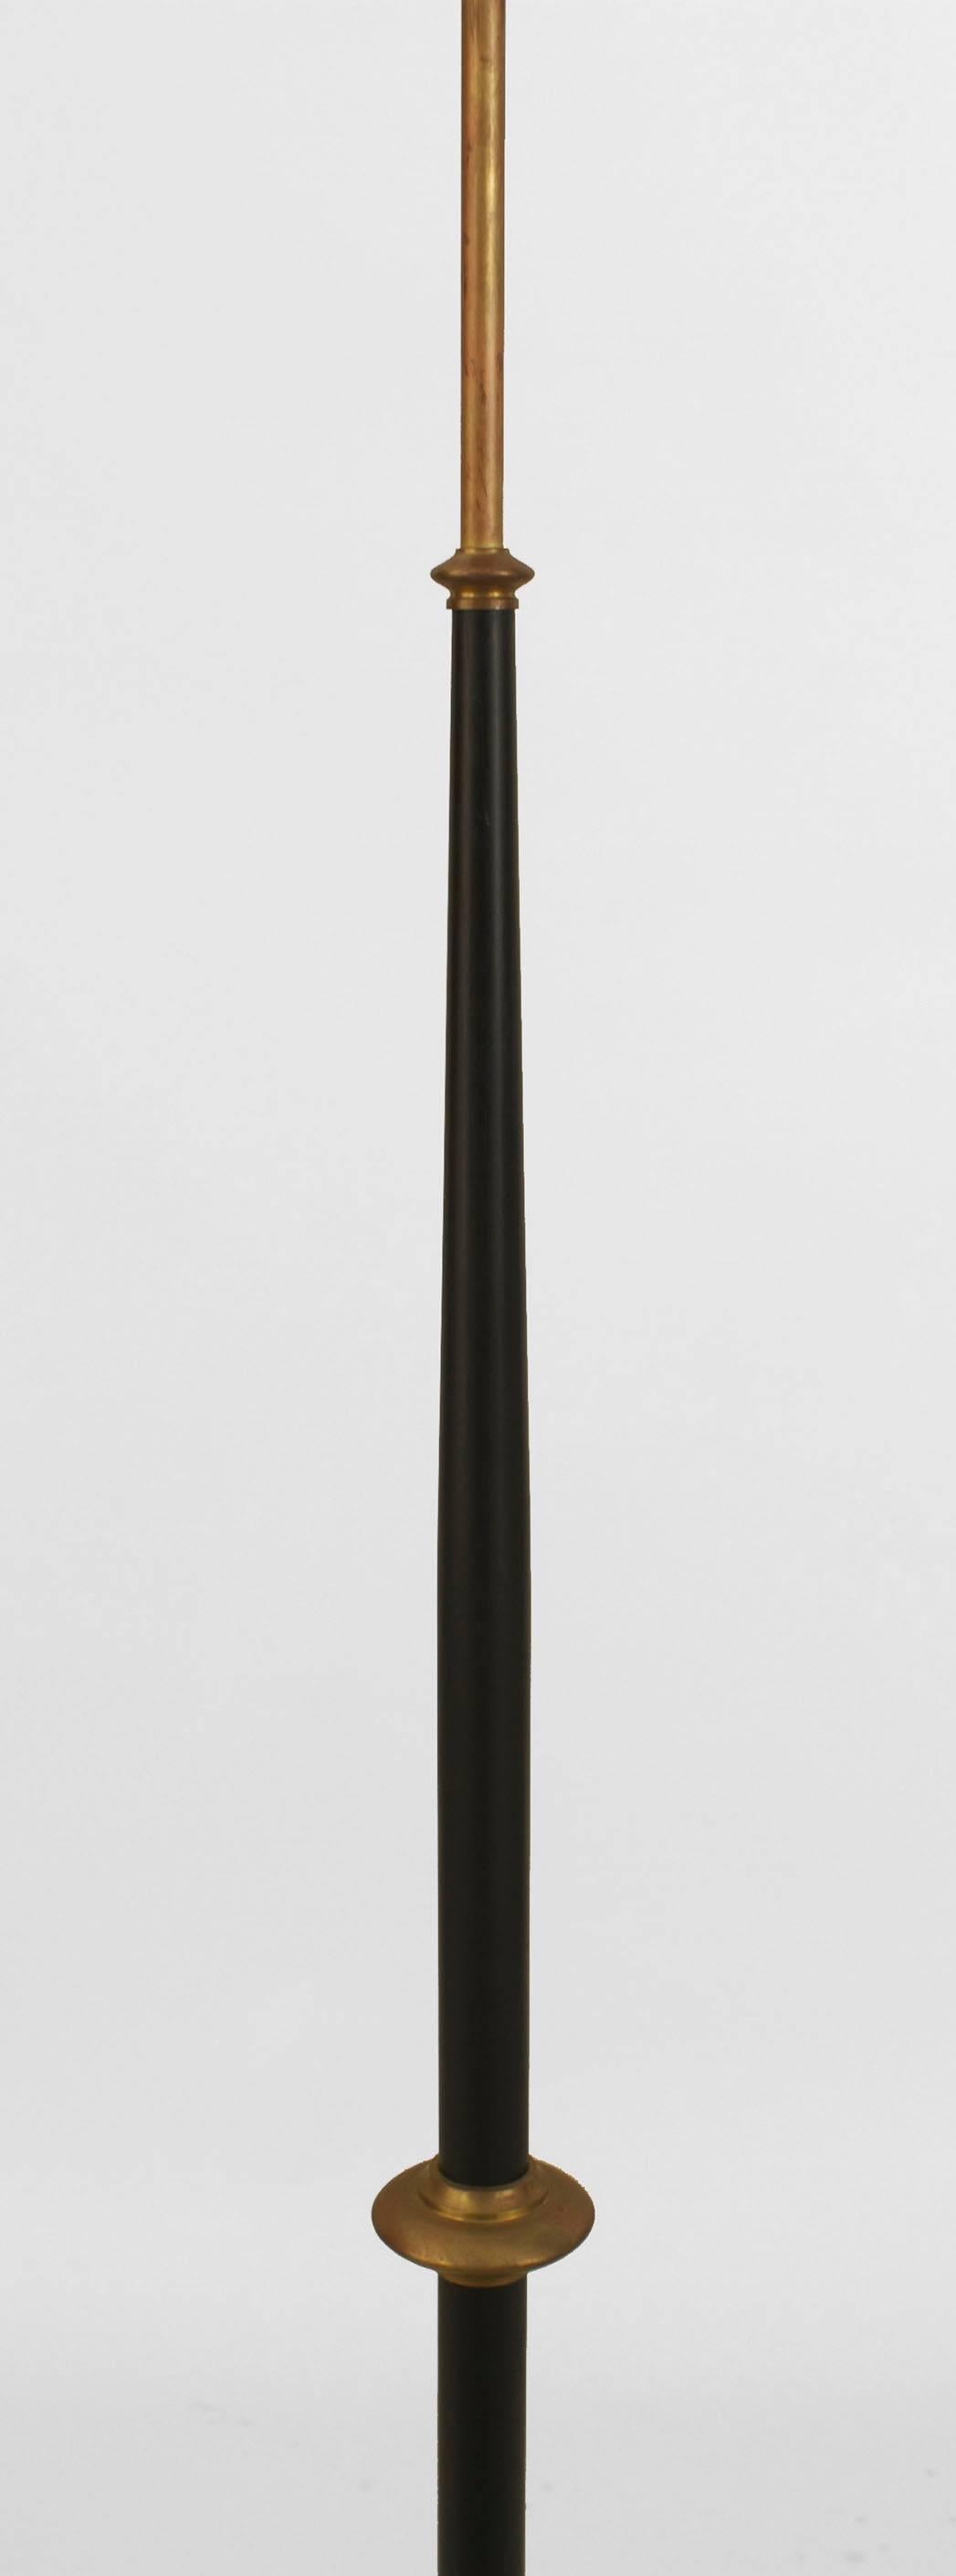 French Art Deco (1940s) ebonized lacquered gilded bronze trim and base floor lamp.
